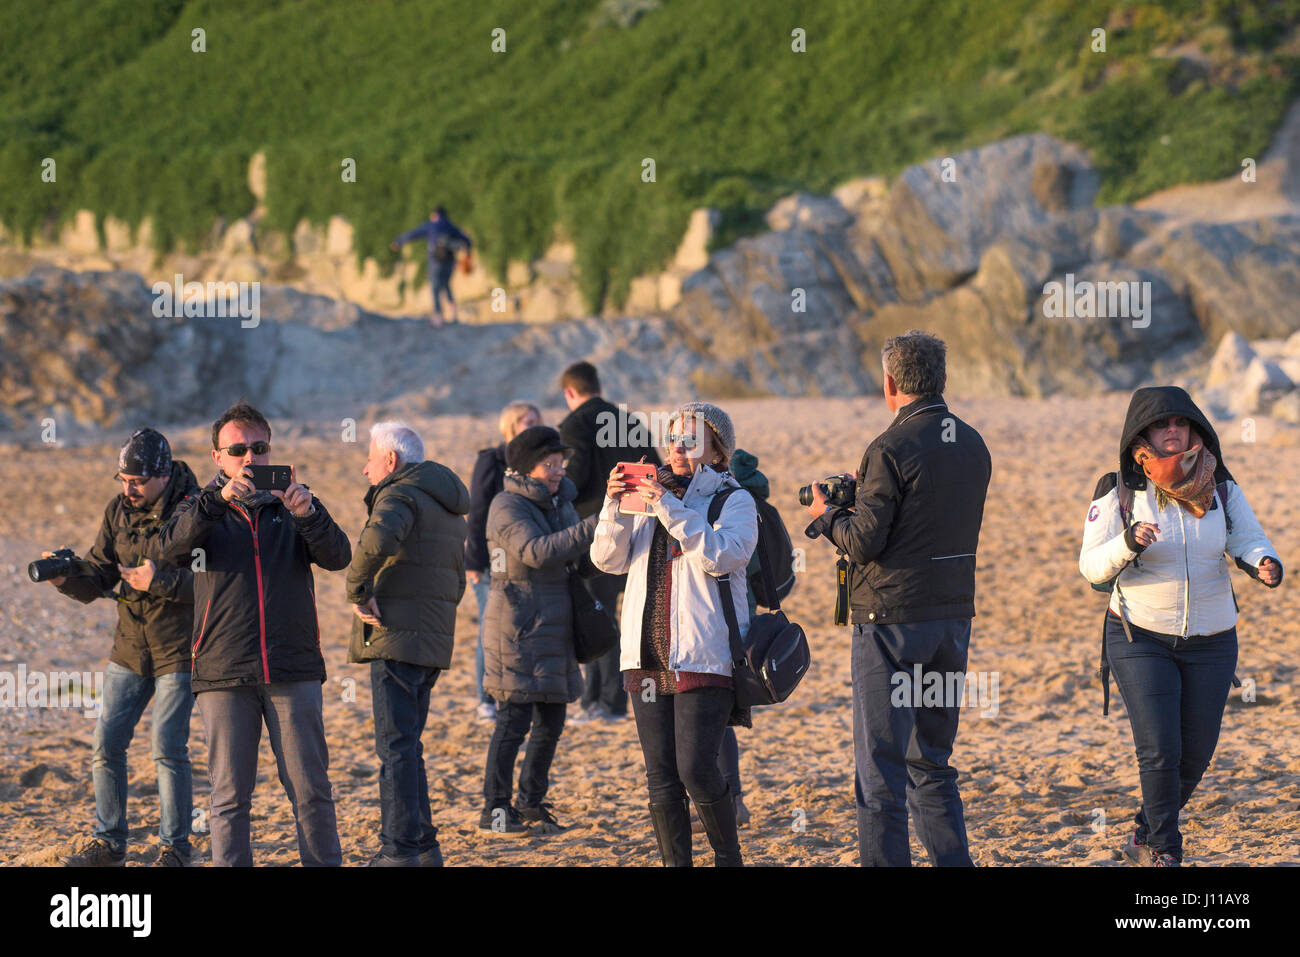 Tourists Group Fistral Beach Sightseeing Photographing Visitors Tourism Evening Cornwall Stock Photo